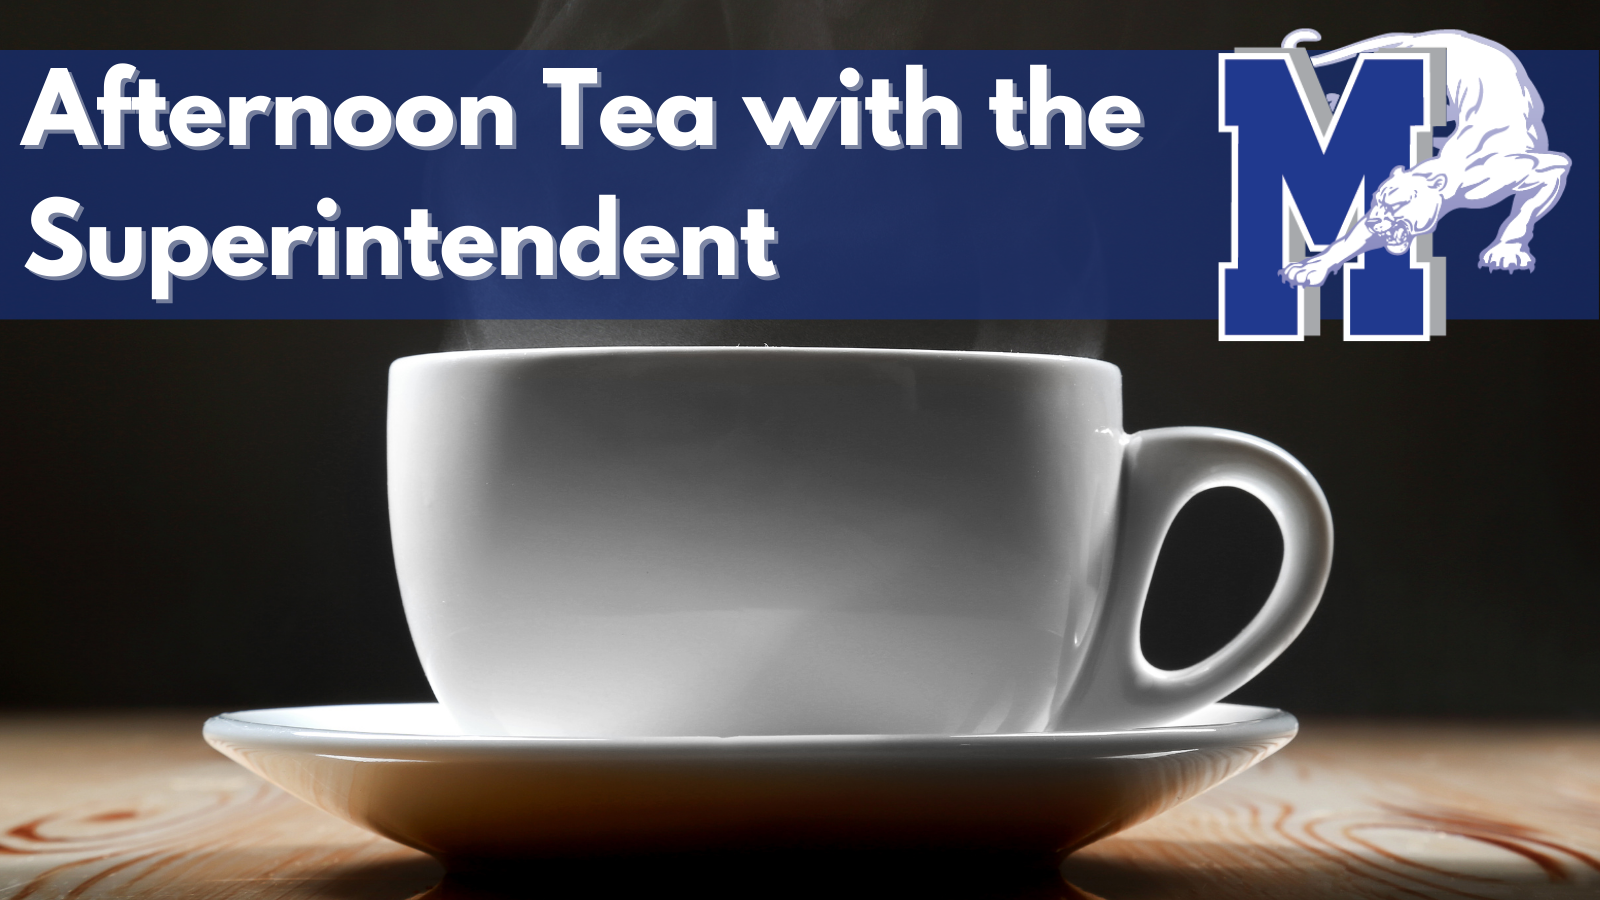 photo of a cup of tea, with the text "Afternoon tea with the superintendent"